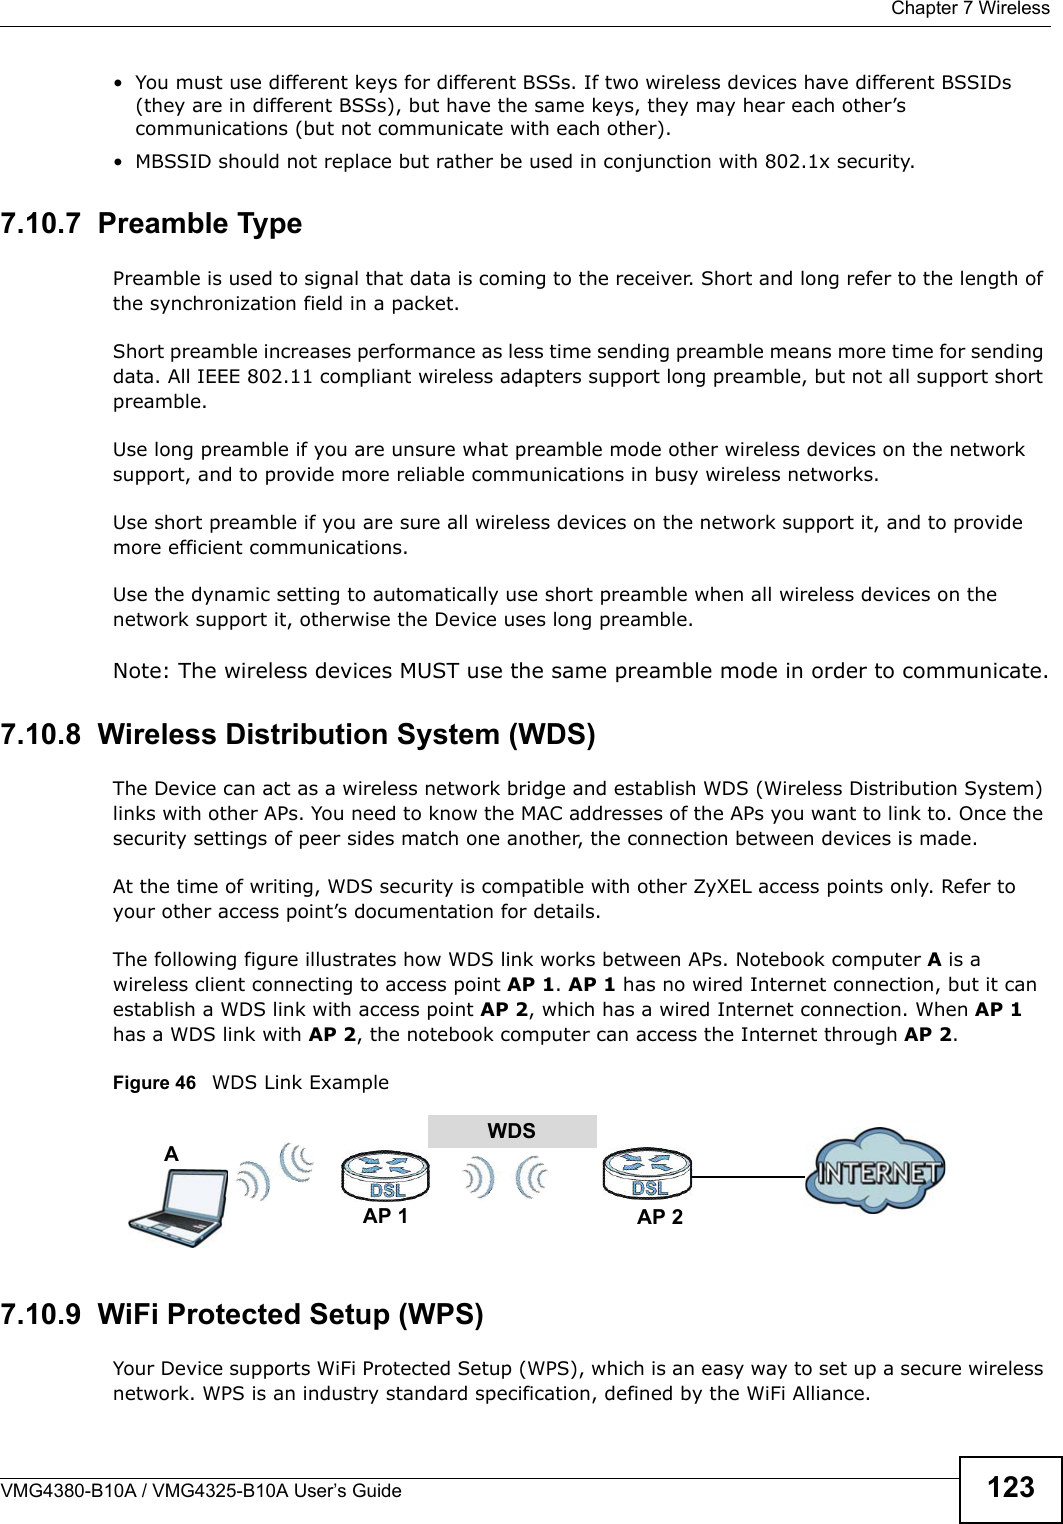  Chapter 7 WirelessVMG4380-B10A / VMG4325-B10A User’s Guide 123• You must use different keys for different BSSs. If two wireless devices have different BSSIDs (they are in different BSSs), but have the same keys, they may hear each other’s communications (but not communicate with each other).• MBSSID should not replace but rather be used in conjunction with 802.1x security.7.10.7  Preamble TypePreamble is used to signal that data is coming to the receiver. Short and long refer to the length of the synchronization field in a packet.Short preamble increases performance as less time sending preamble means more time for sending data. All IEEE 802.11 compliant wireless adapters support long preamble, but not all support short preamble. Use long preamble if you are unsure what preamble mode other wireless devices on the network support, and to provide more reliable communications in busy wireless networks. Use short preamble if you are sure all wireless devices on the network support it, and to provide more efficient communications.Use the dynamic setting to automatically use short preamble when all wireless devices on the network support it, otherwise the Device uses long preamble.Note: The wireless devices MUST use the same preamble mode in order to communicate.7.10.8  Wireless Distribution System (WDS)The Device can act as a wireless network bridge and establish WDS (Wireless Distribution System) links with other APs. You need to know the MAC addresses of the APs you want to link to. Once the security settings of peer sides match one another, the connection between devices is made.At the time of writing, WDS security is compatible with other ZyXEL access points only. Refer to your other access point’s documentation for details.The following figure illustrates how WDS link works between APs. Notebook computer A is a wireless client connecting to access point AP 1. AP 1 has no wired Internet connection, but it canestablish a WDS link with access point AP 2, which has a wired Internet connection. When AP 1has a WDS link with AP 2, the notebook computer can access the Internet through AP 2.Figure 46   WDS Link Example7.10.9  WiFi Protected Setup (WPS)Your Device supports WiFi Protected Setup (WPS), which is an easy way to set up a secure wireless network. WPS is an industry standard specification, defined by the WiFi Alliance.WDSAP 2AP 1A